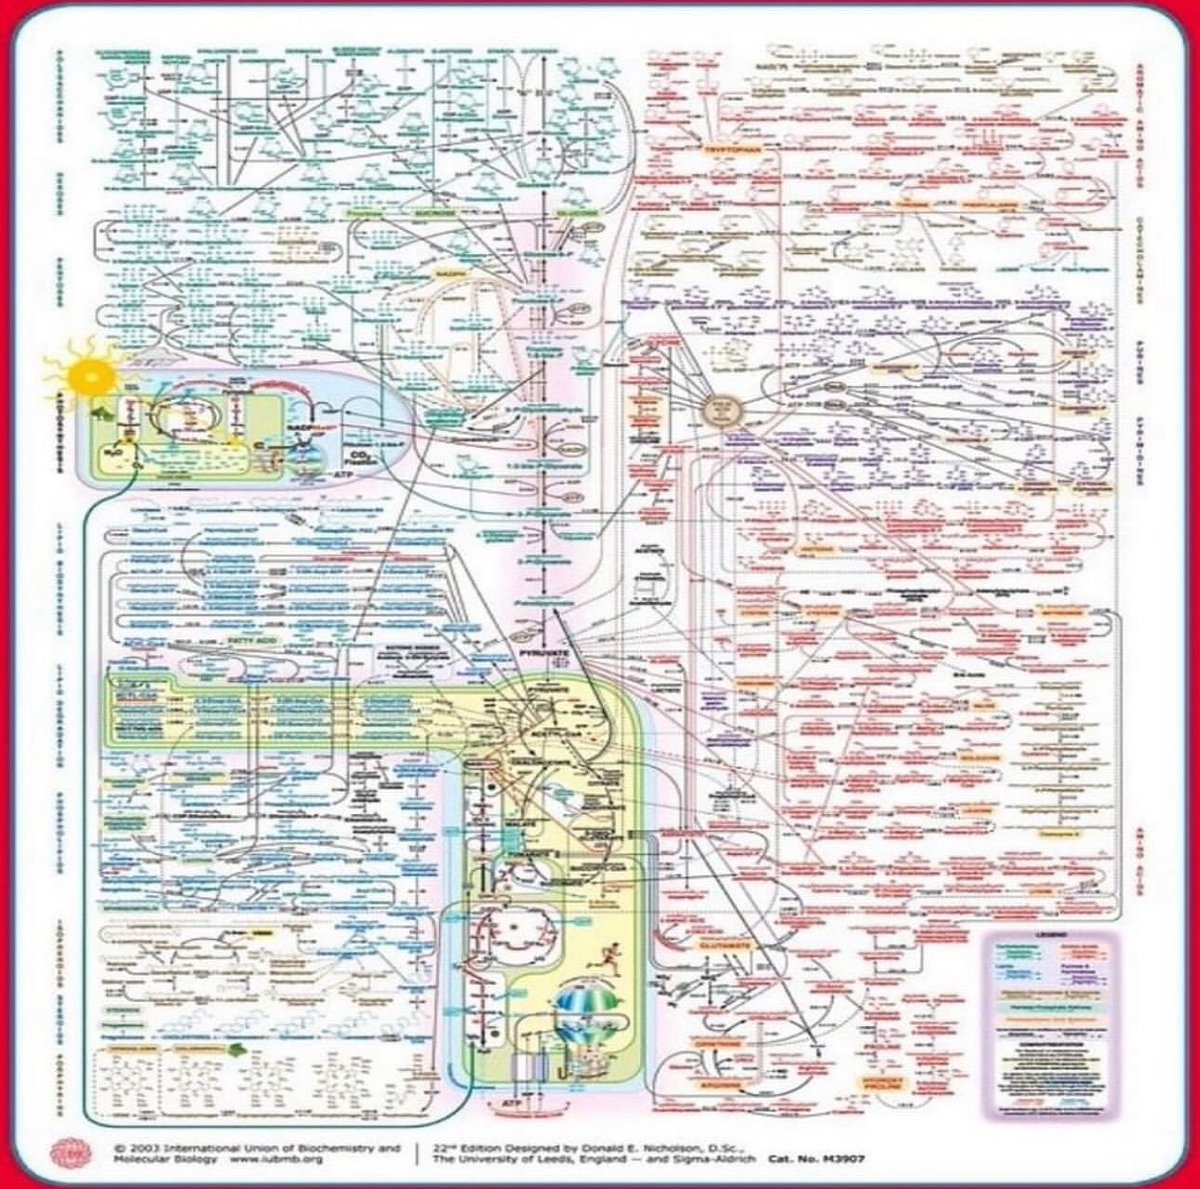 A simplified overview of Metabolism 🫣😅 #Science